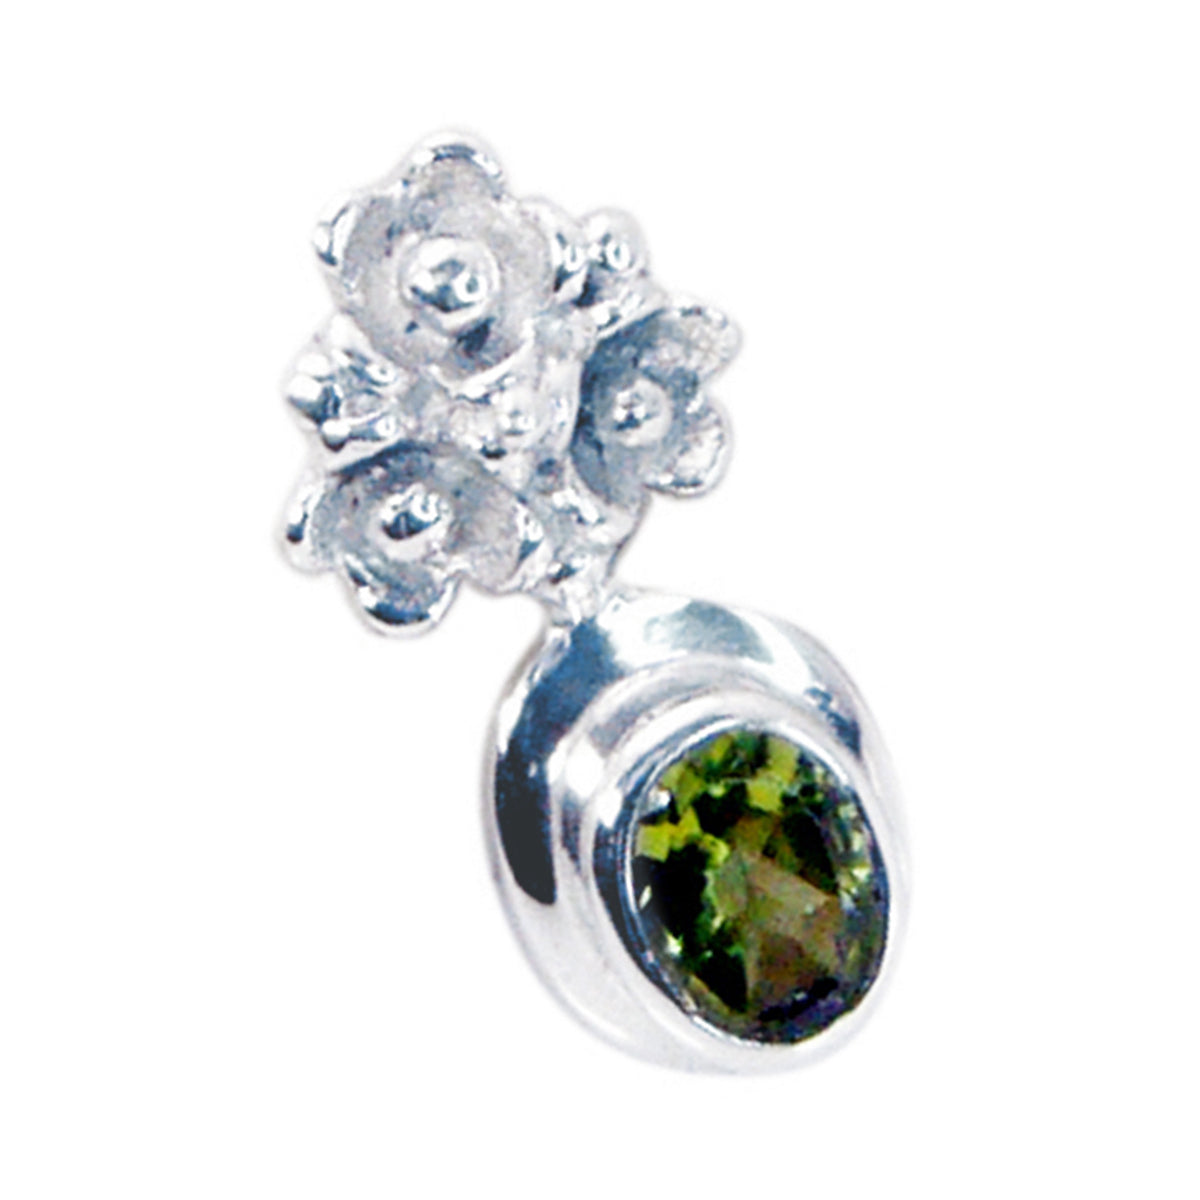 Riyo Cute Gems Oval Faceted Green Peridot Silver Pendant Gift For Wife